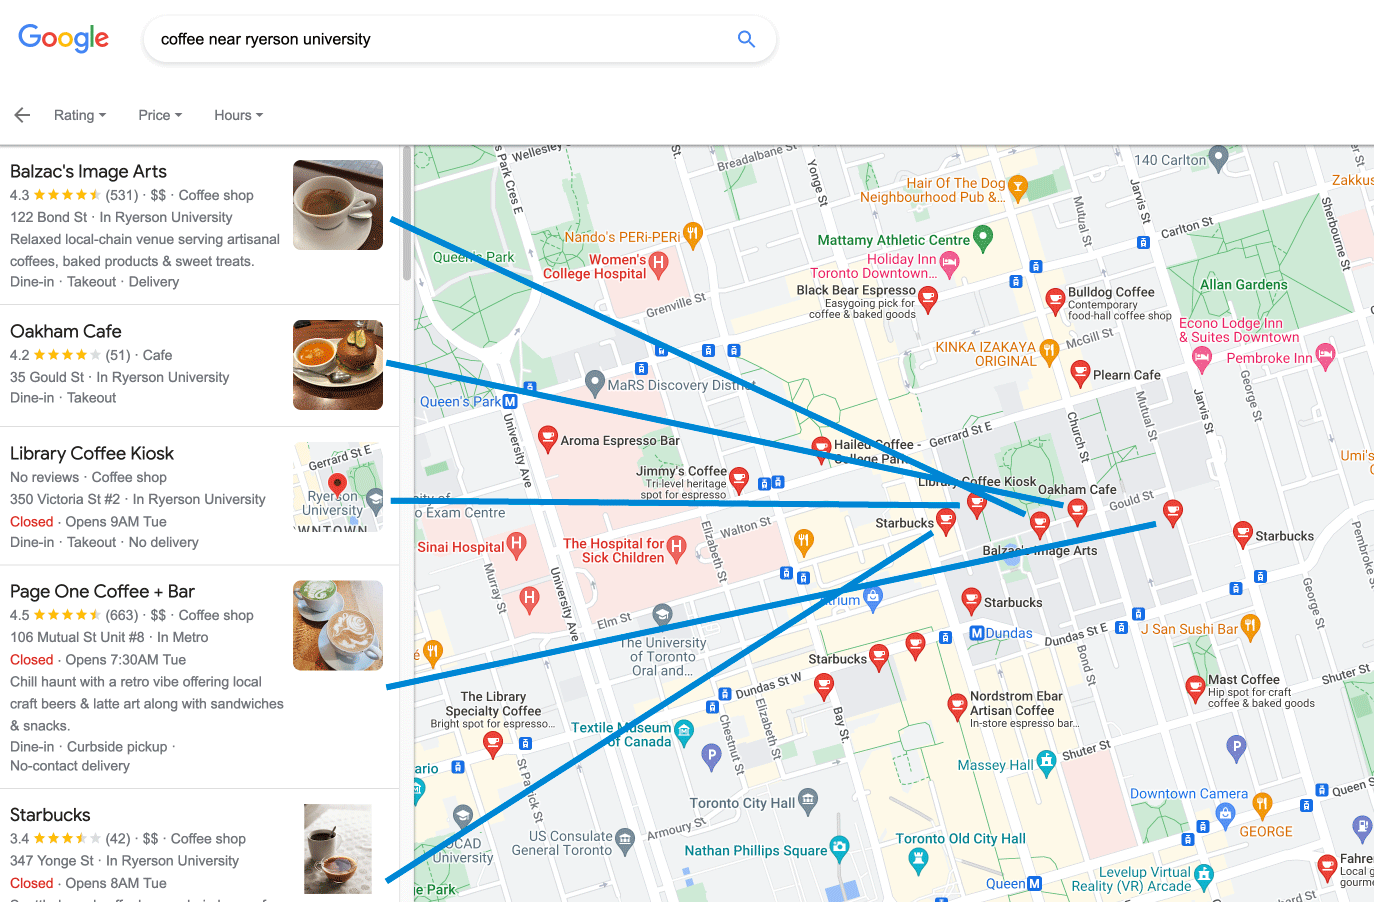 Map of Toronto Metropolitan University (formerly Ryerson University) and its surrounding neighborhood, from Google Maps, with coffee shops marked and connected by line segments to the sidebar